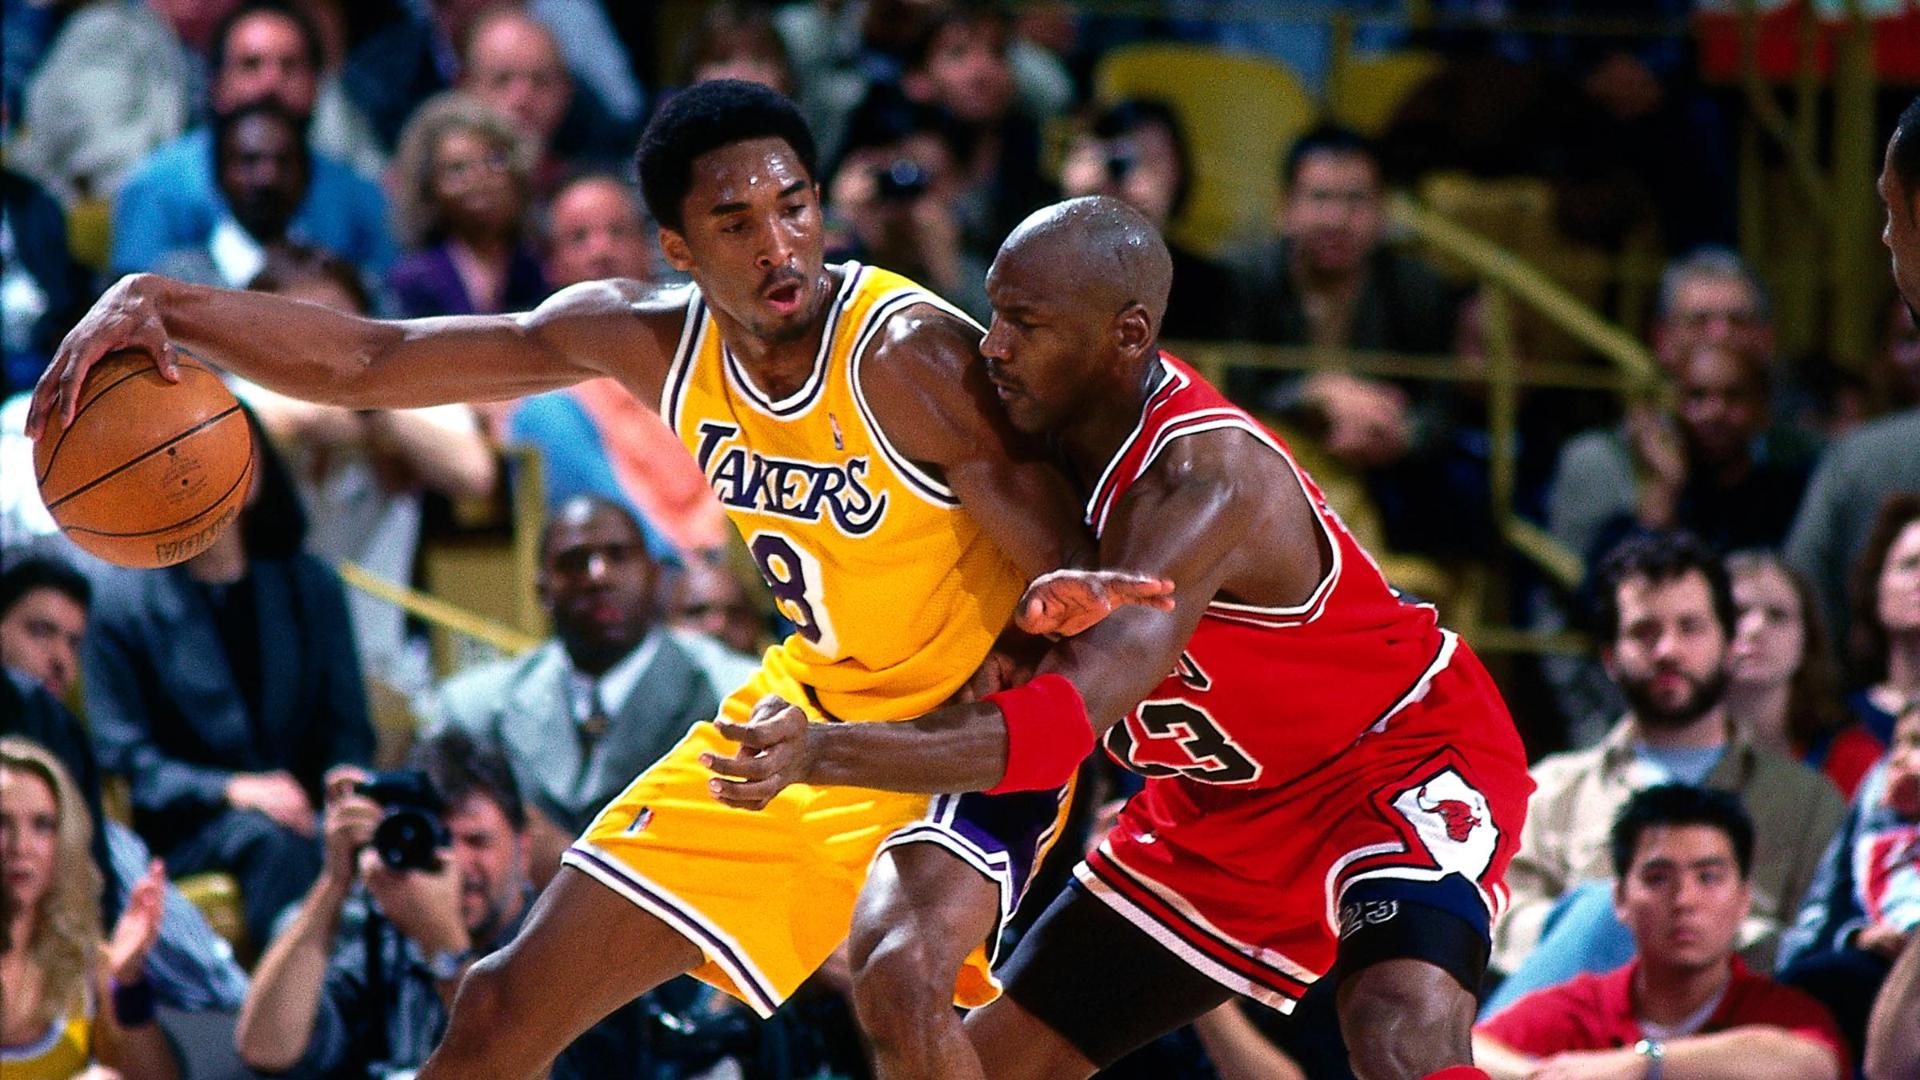 Kobe Bryant Stats, News, Videos, Highlights, Pictures, Bio - Los Angeles Lakers - ESPN1920 x 1080